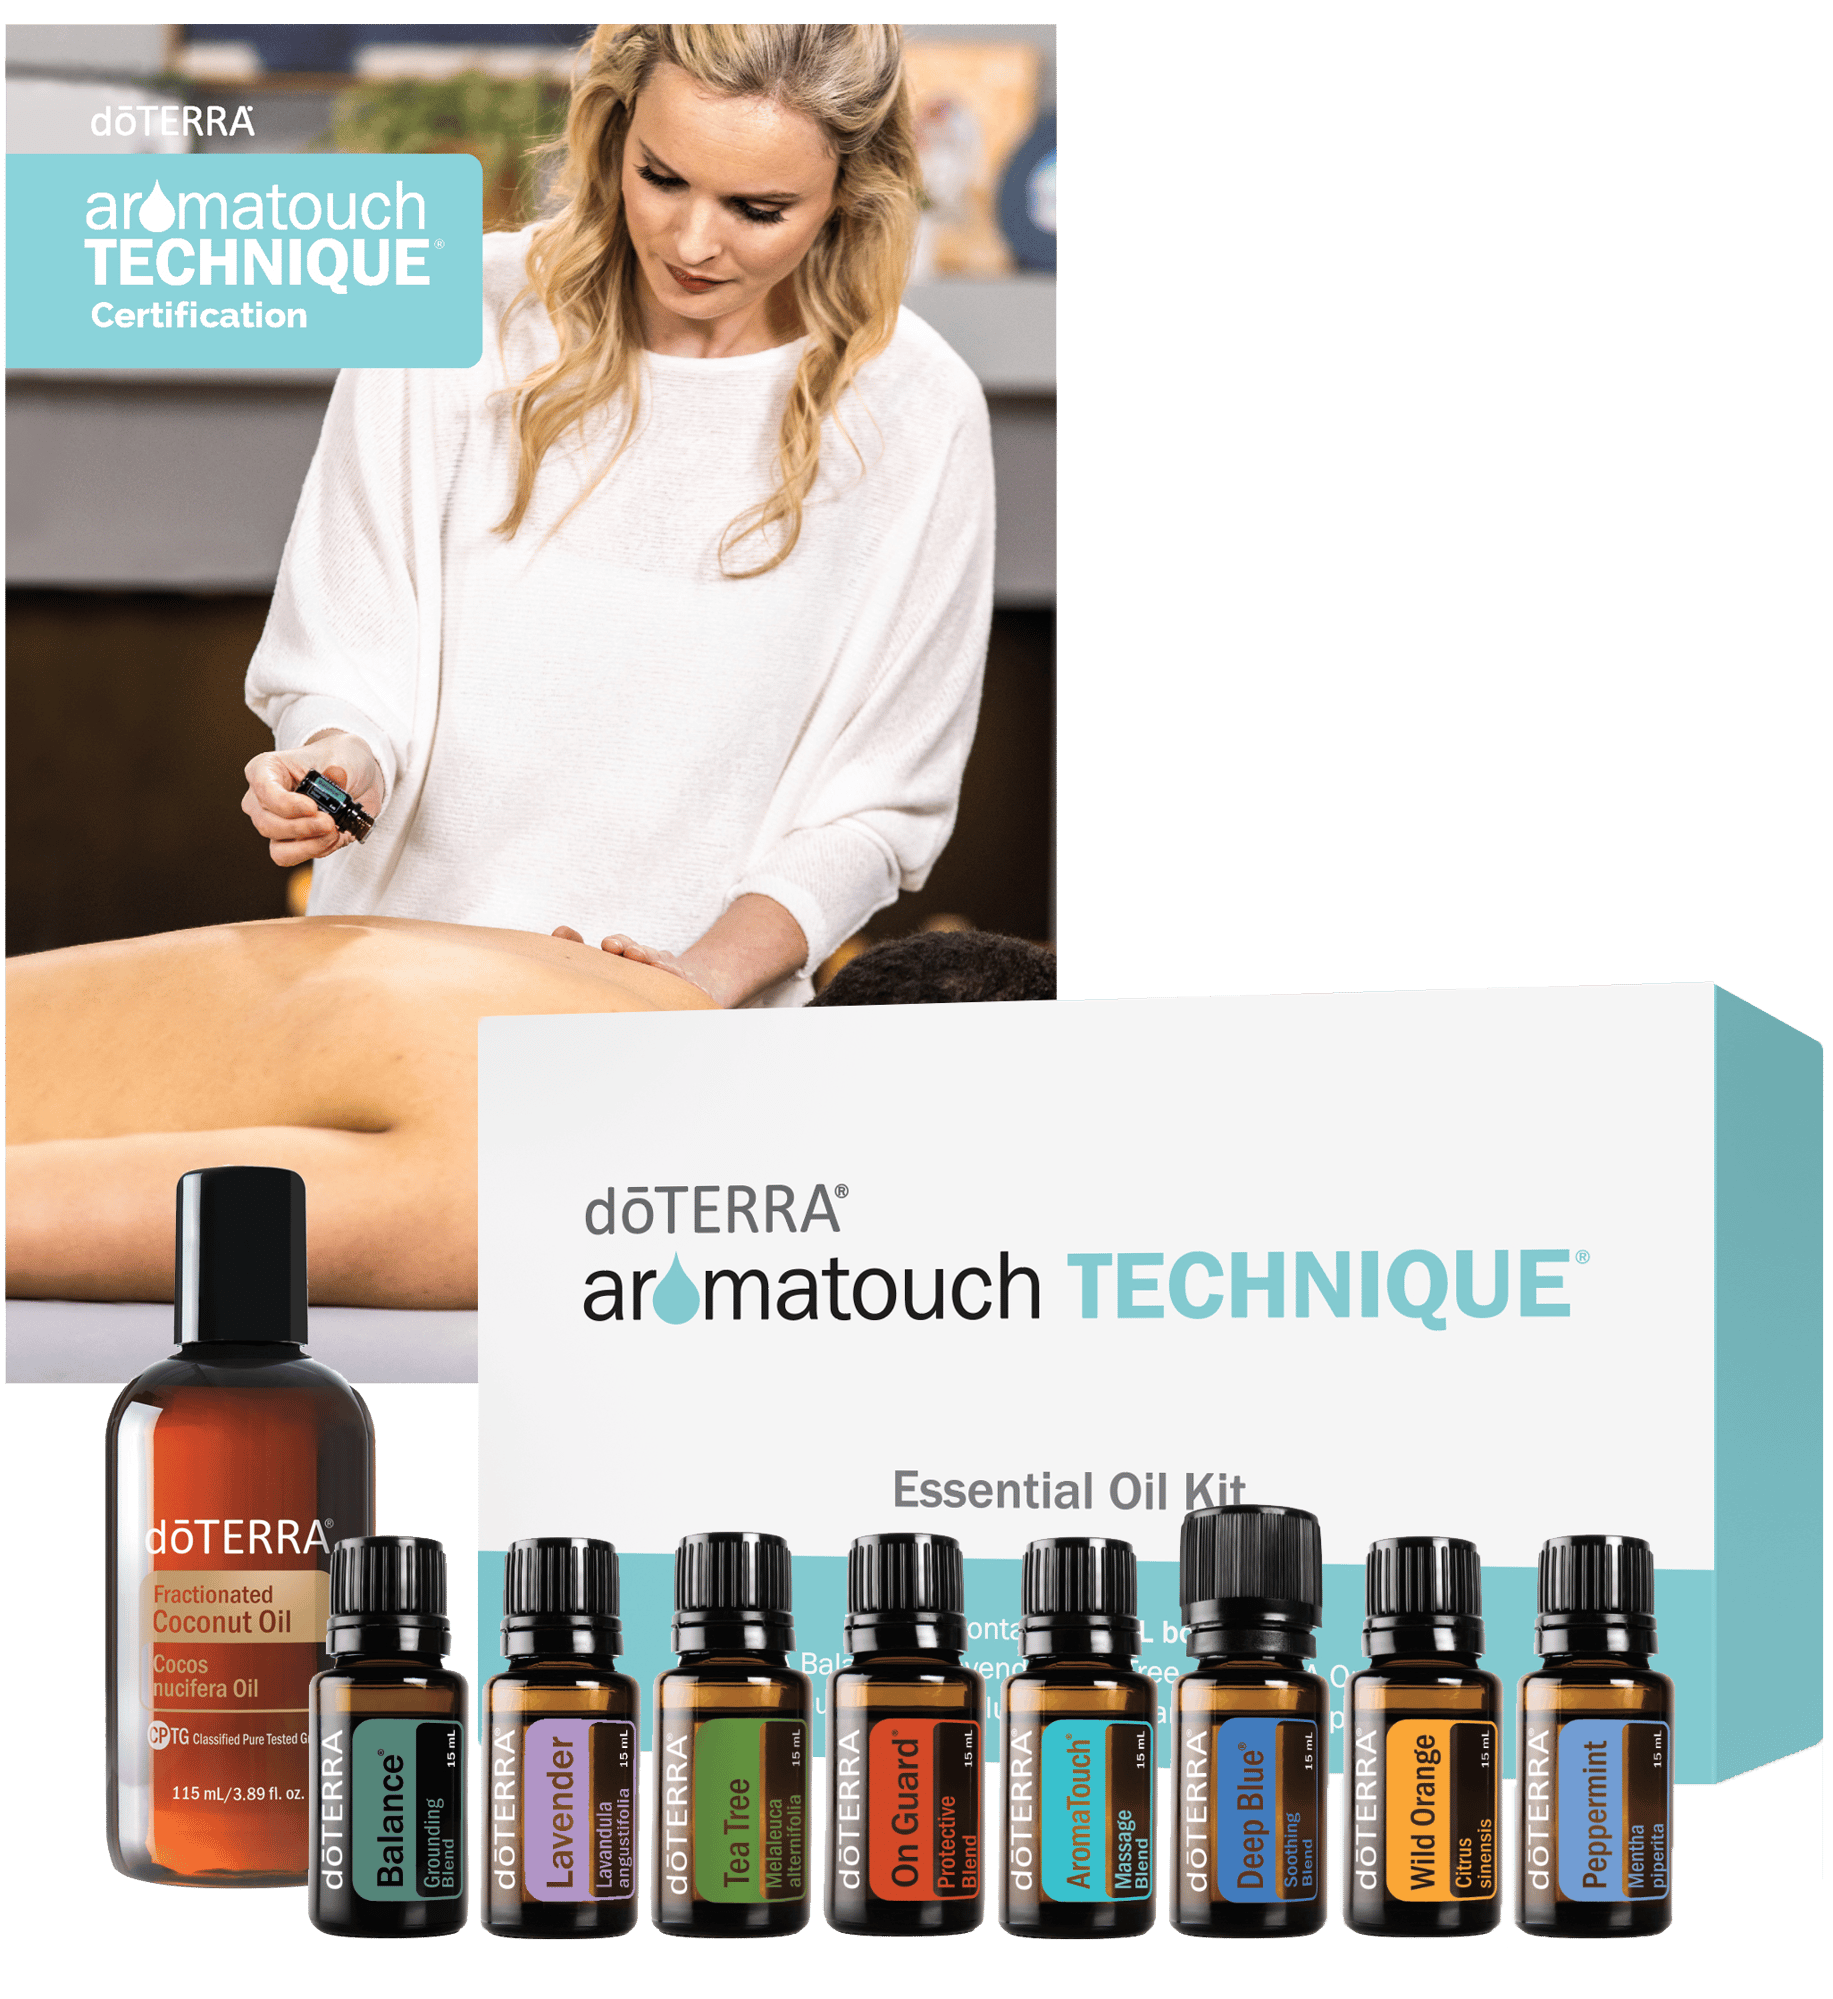 aroma_touch_technique_training_kit_60221903_60221309